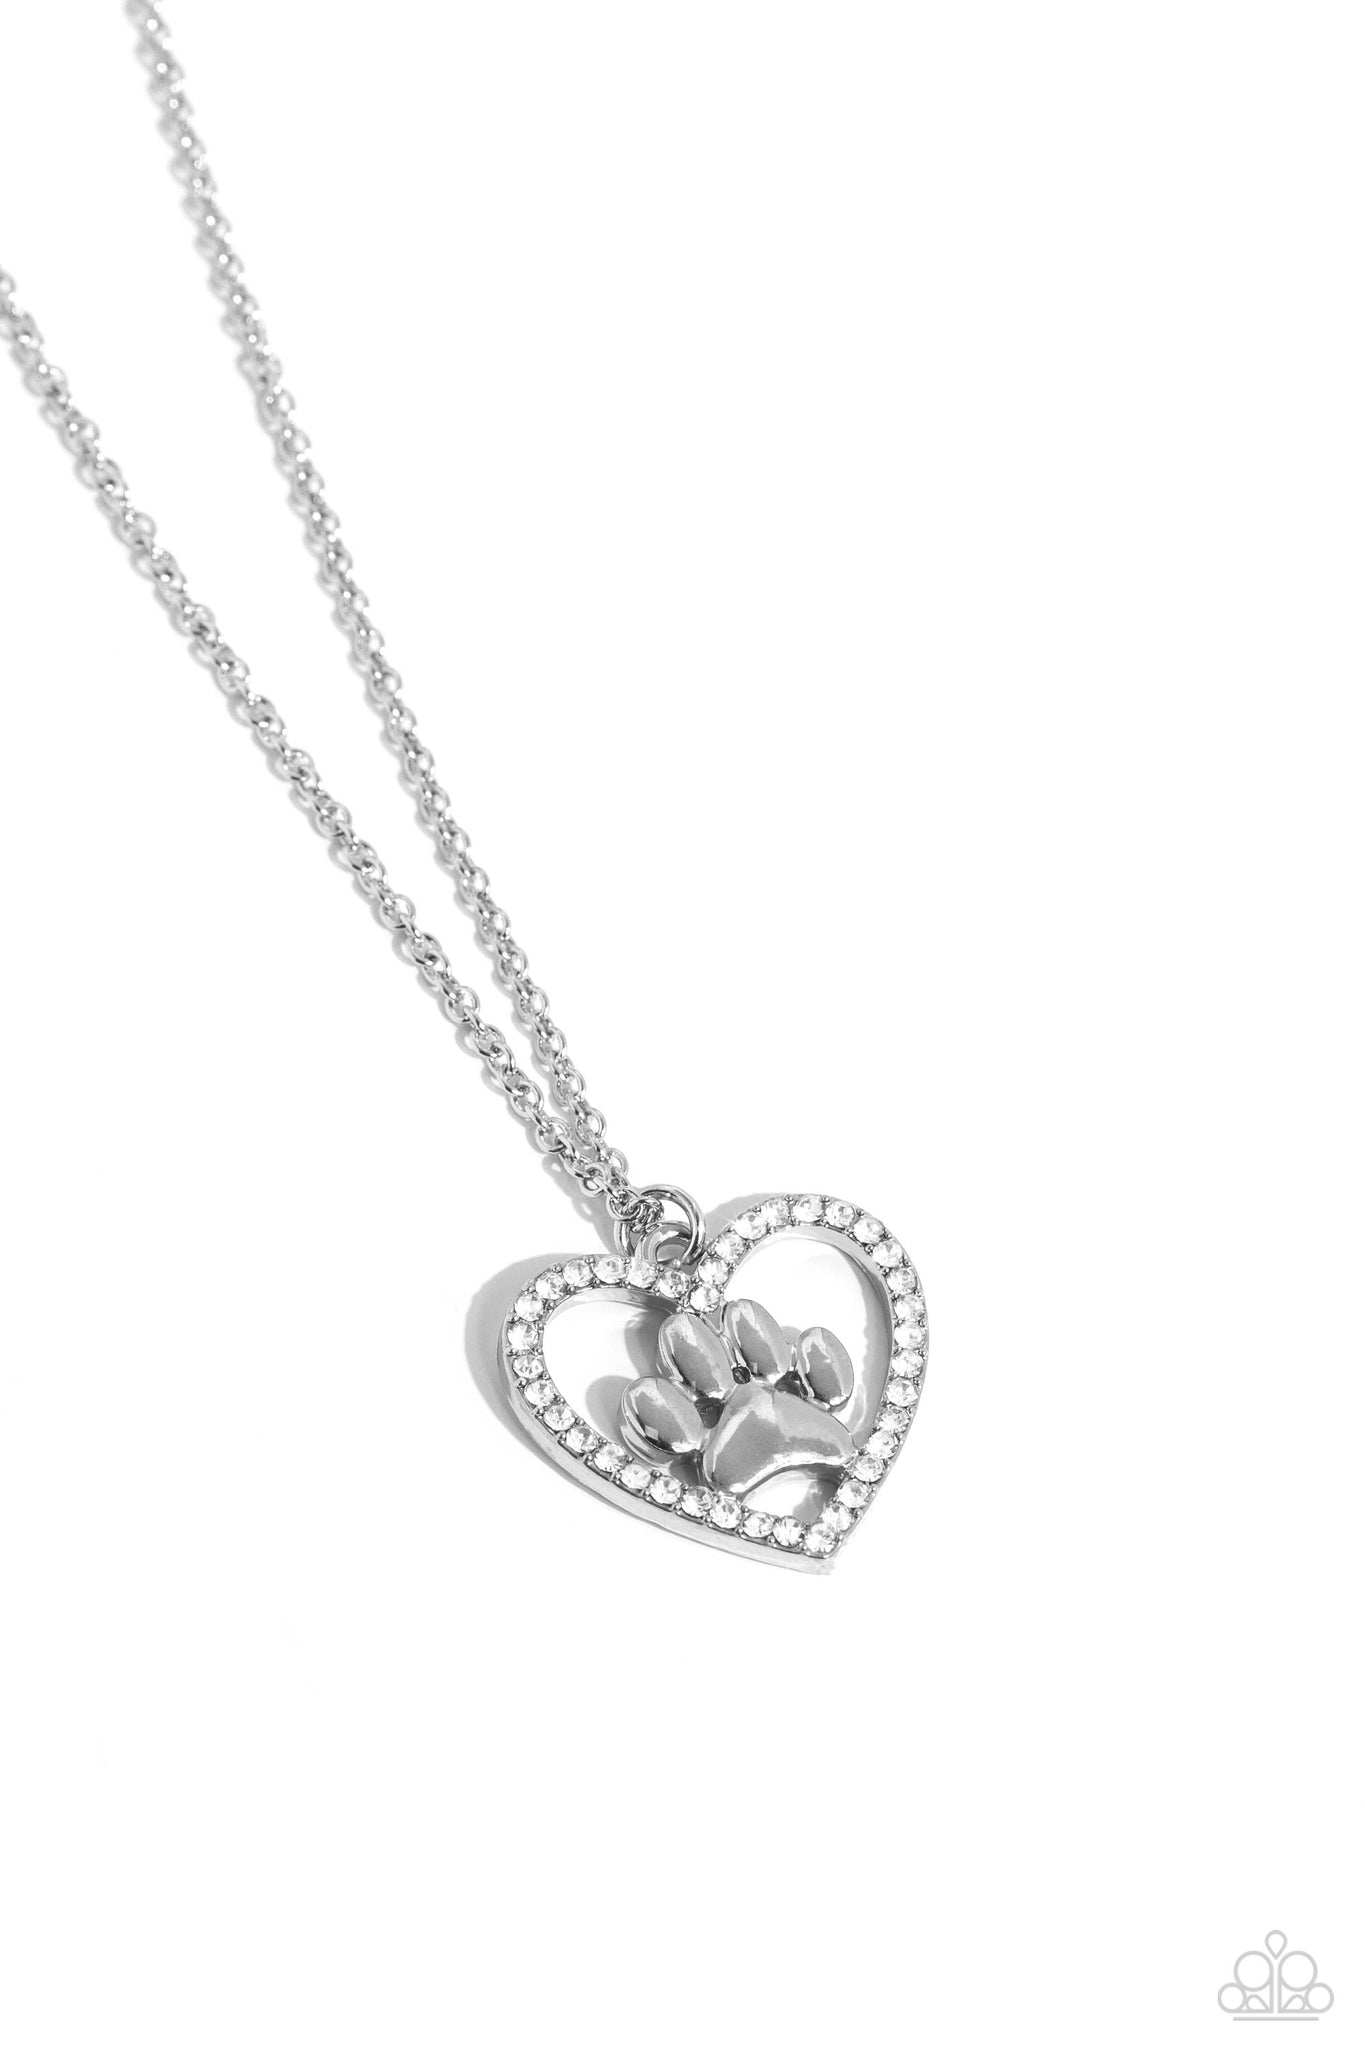 PET in Motion Necklace (White, Rose Gold)